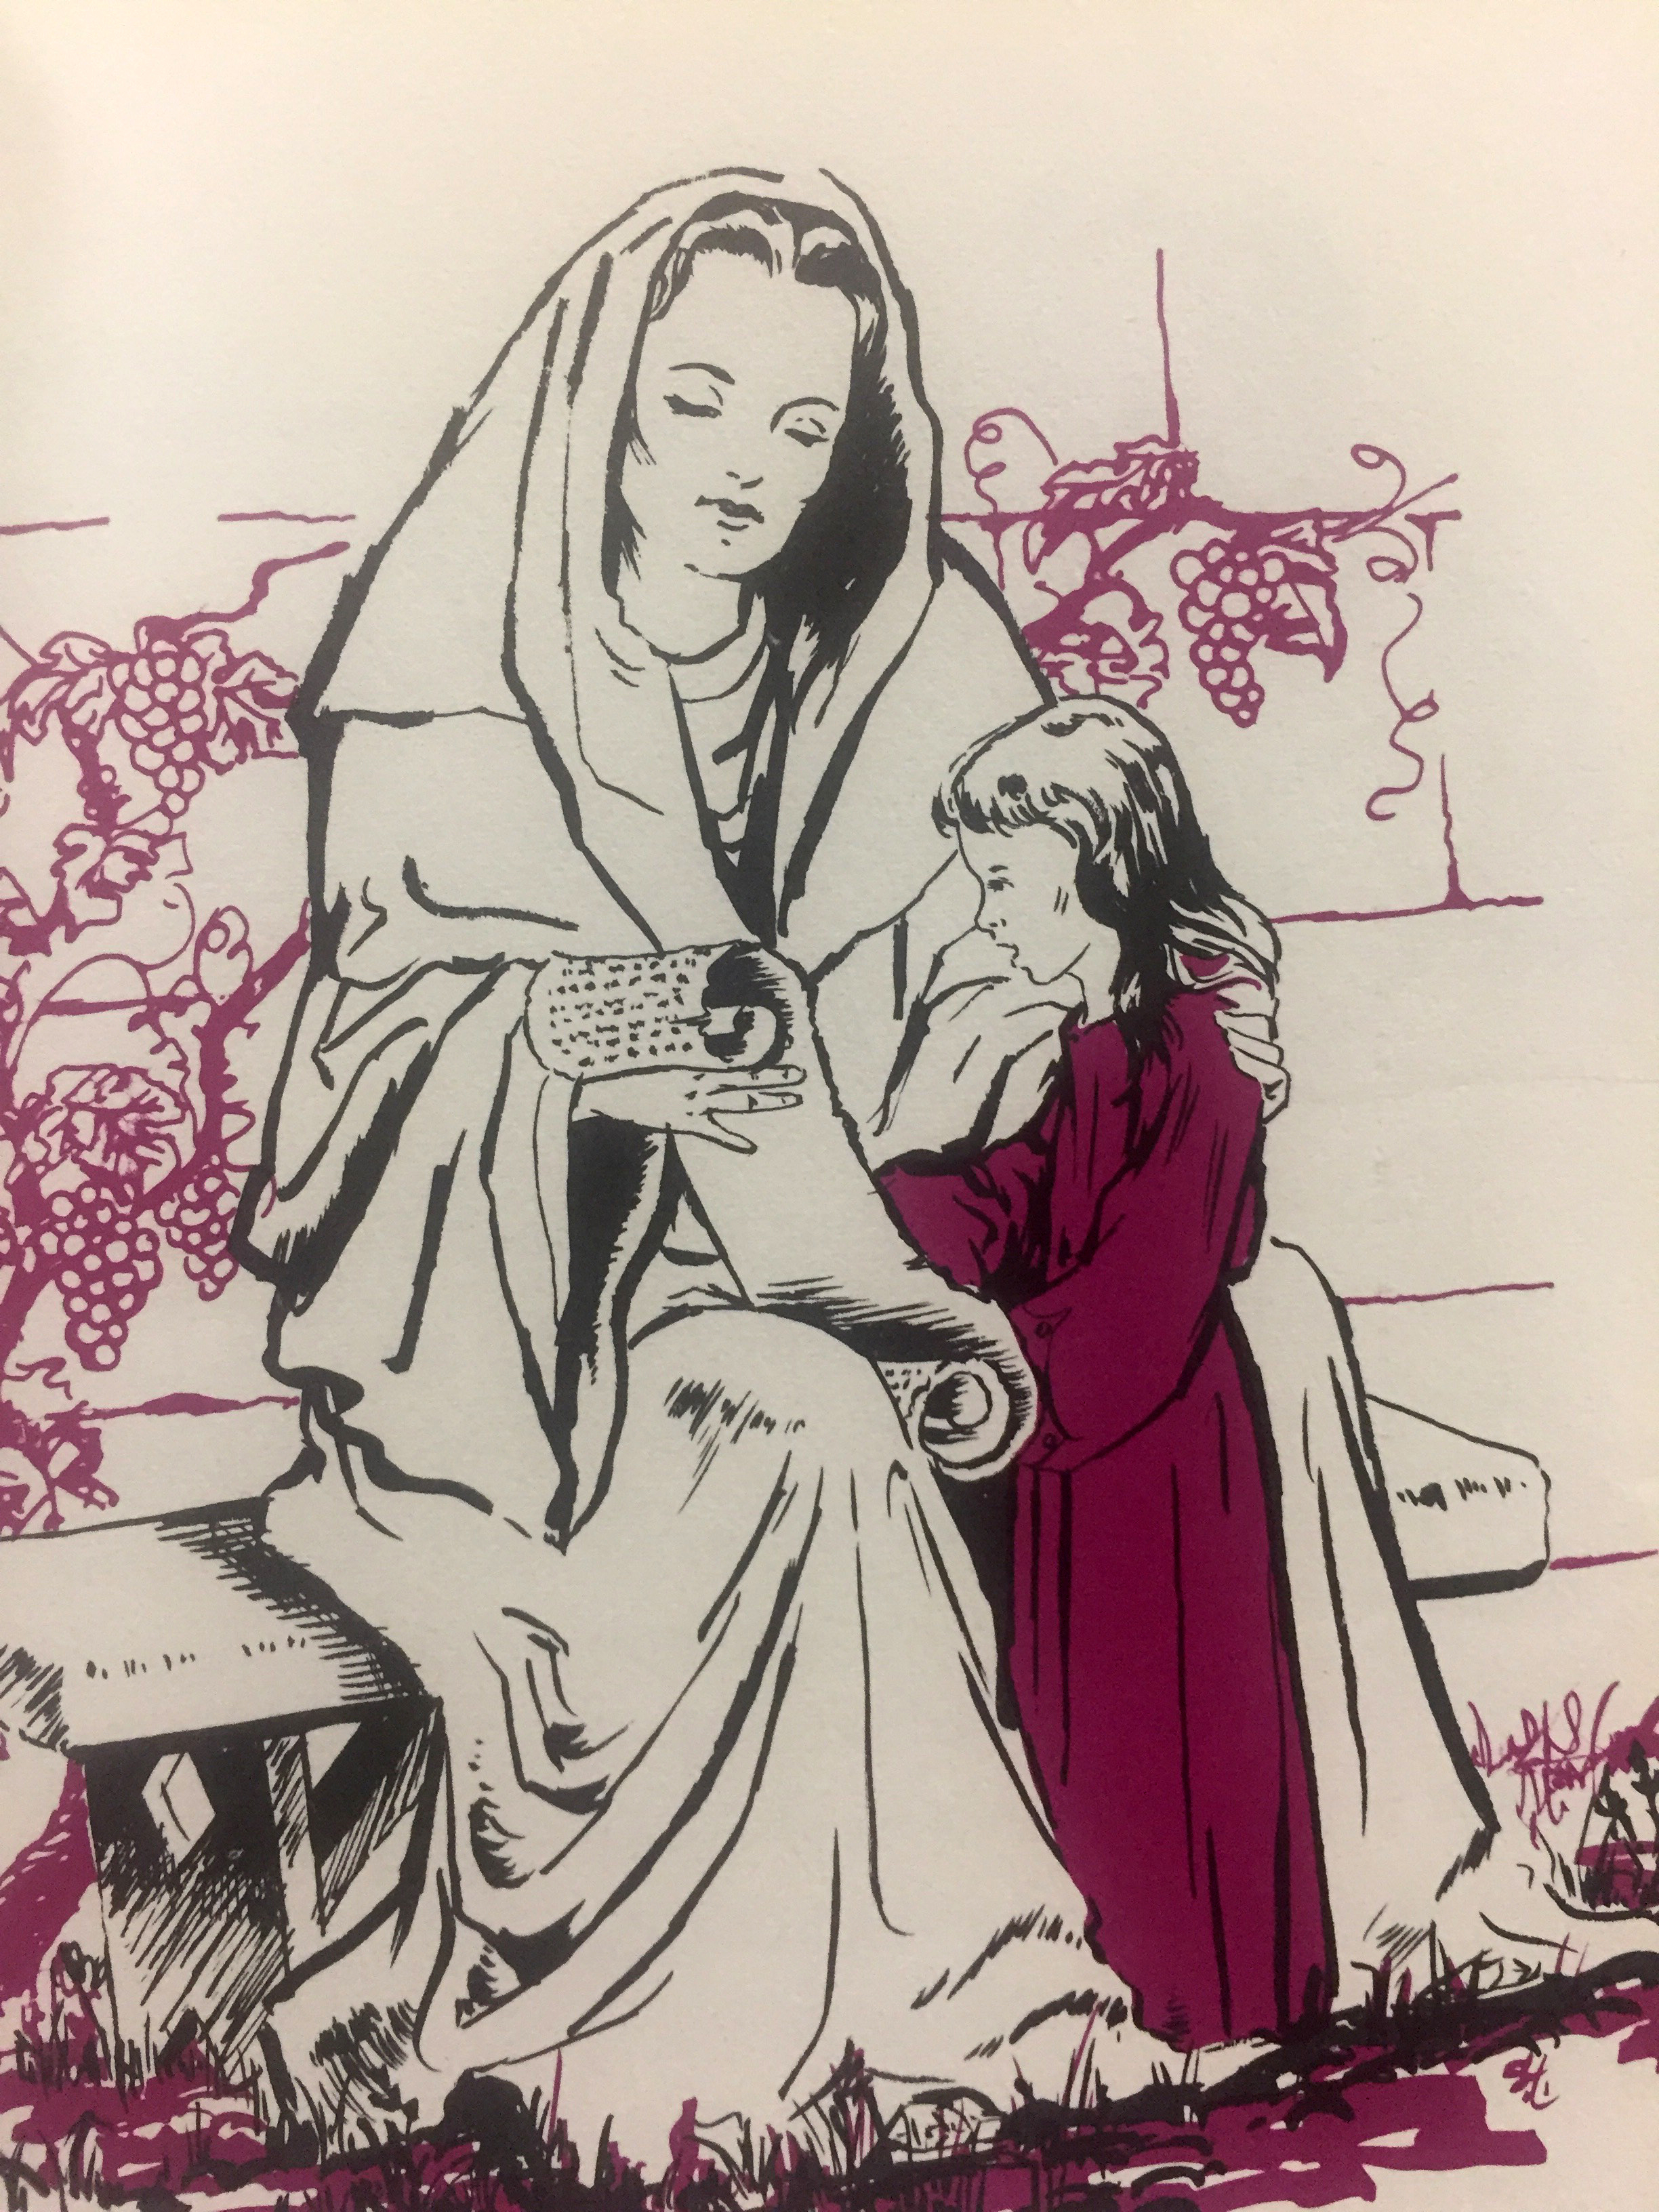 Black and white line art drawing of St. Anne reading a scroll to the child Mary. Highlighted with dark purple ink.